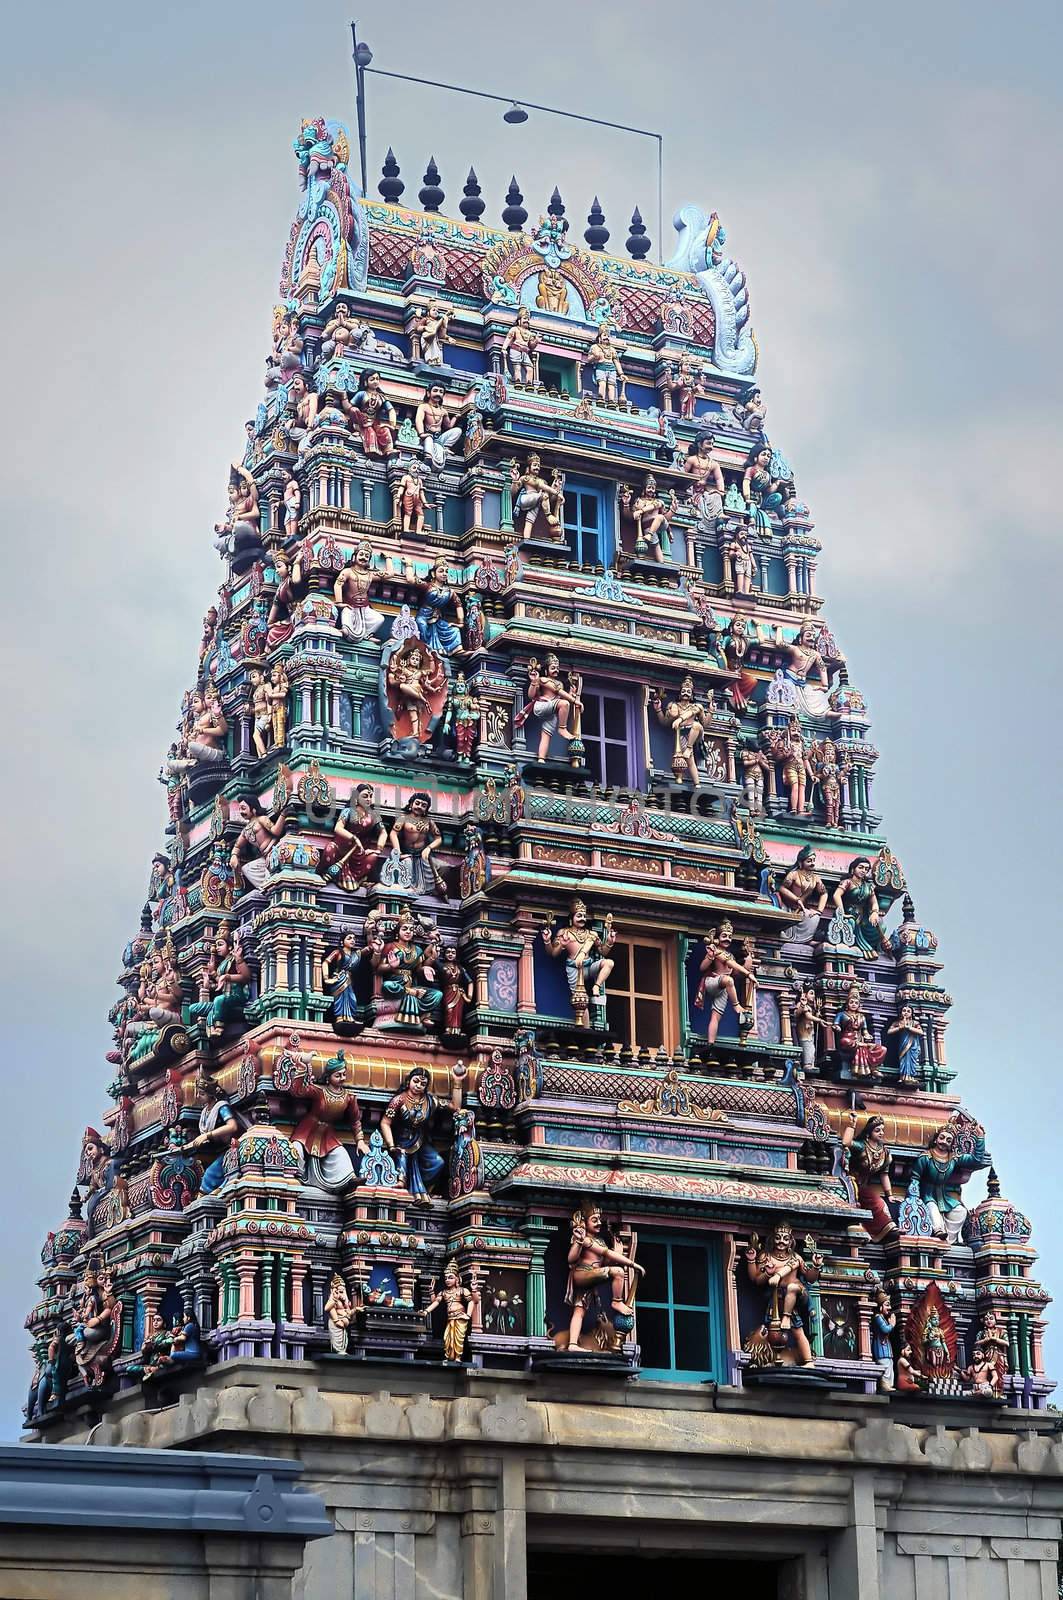 A majestic temple in Southern India displaying wonderful architecture